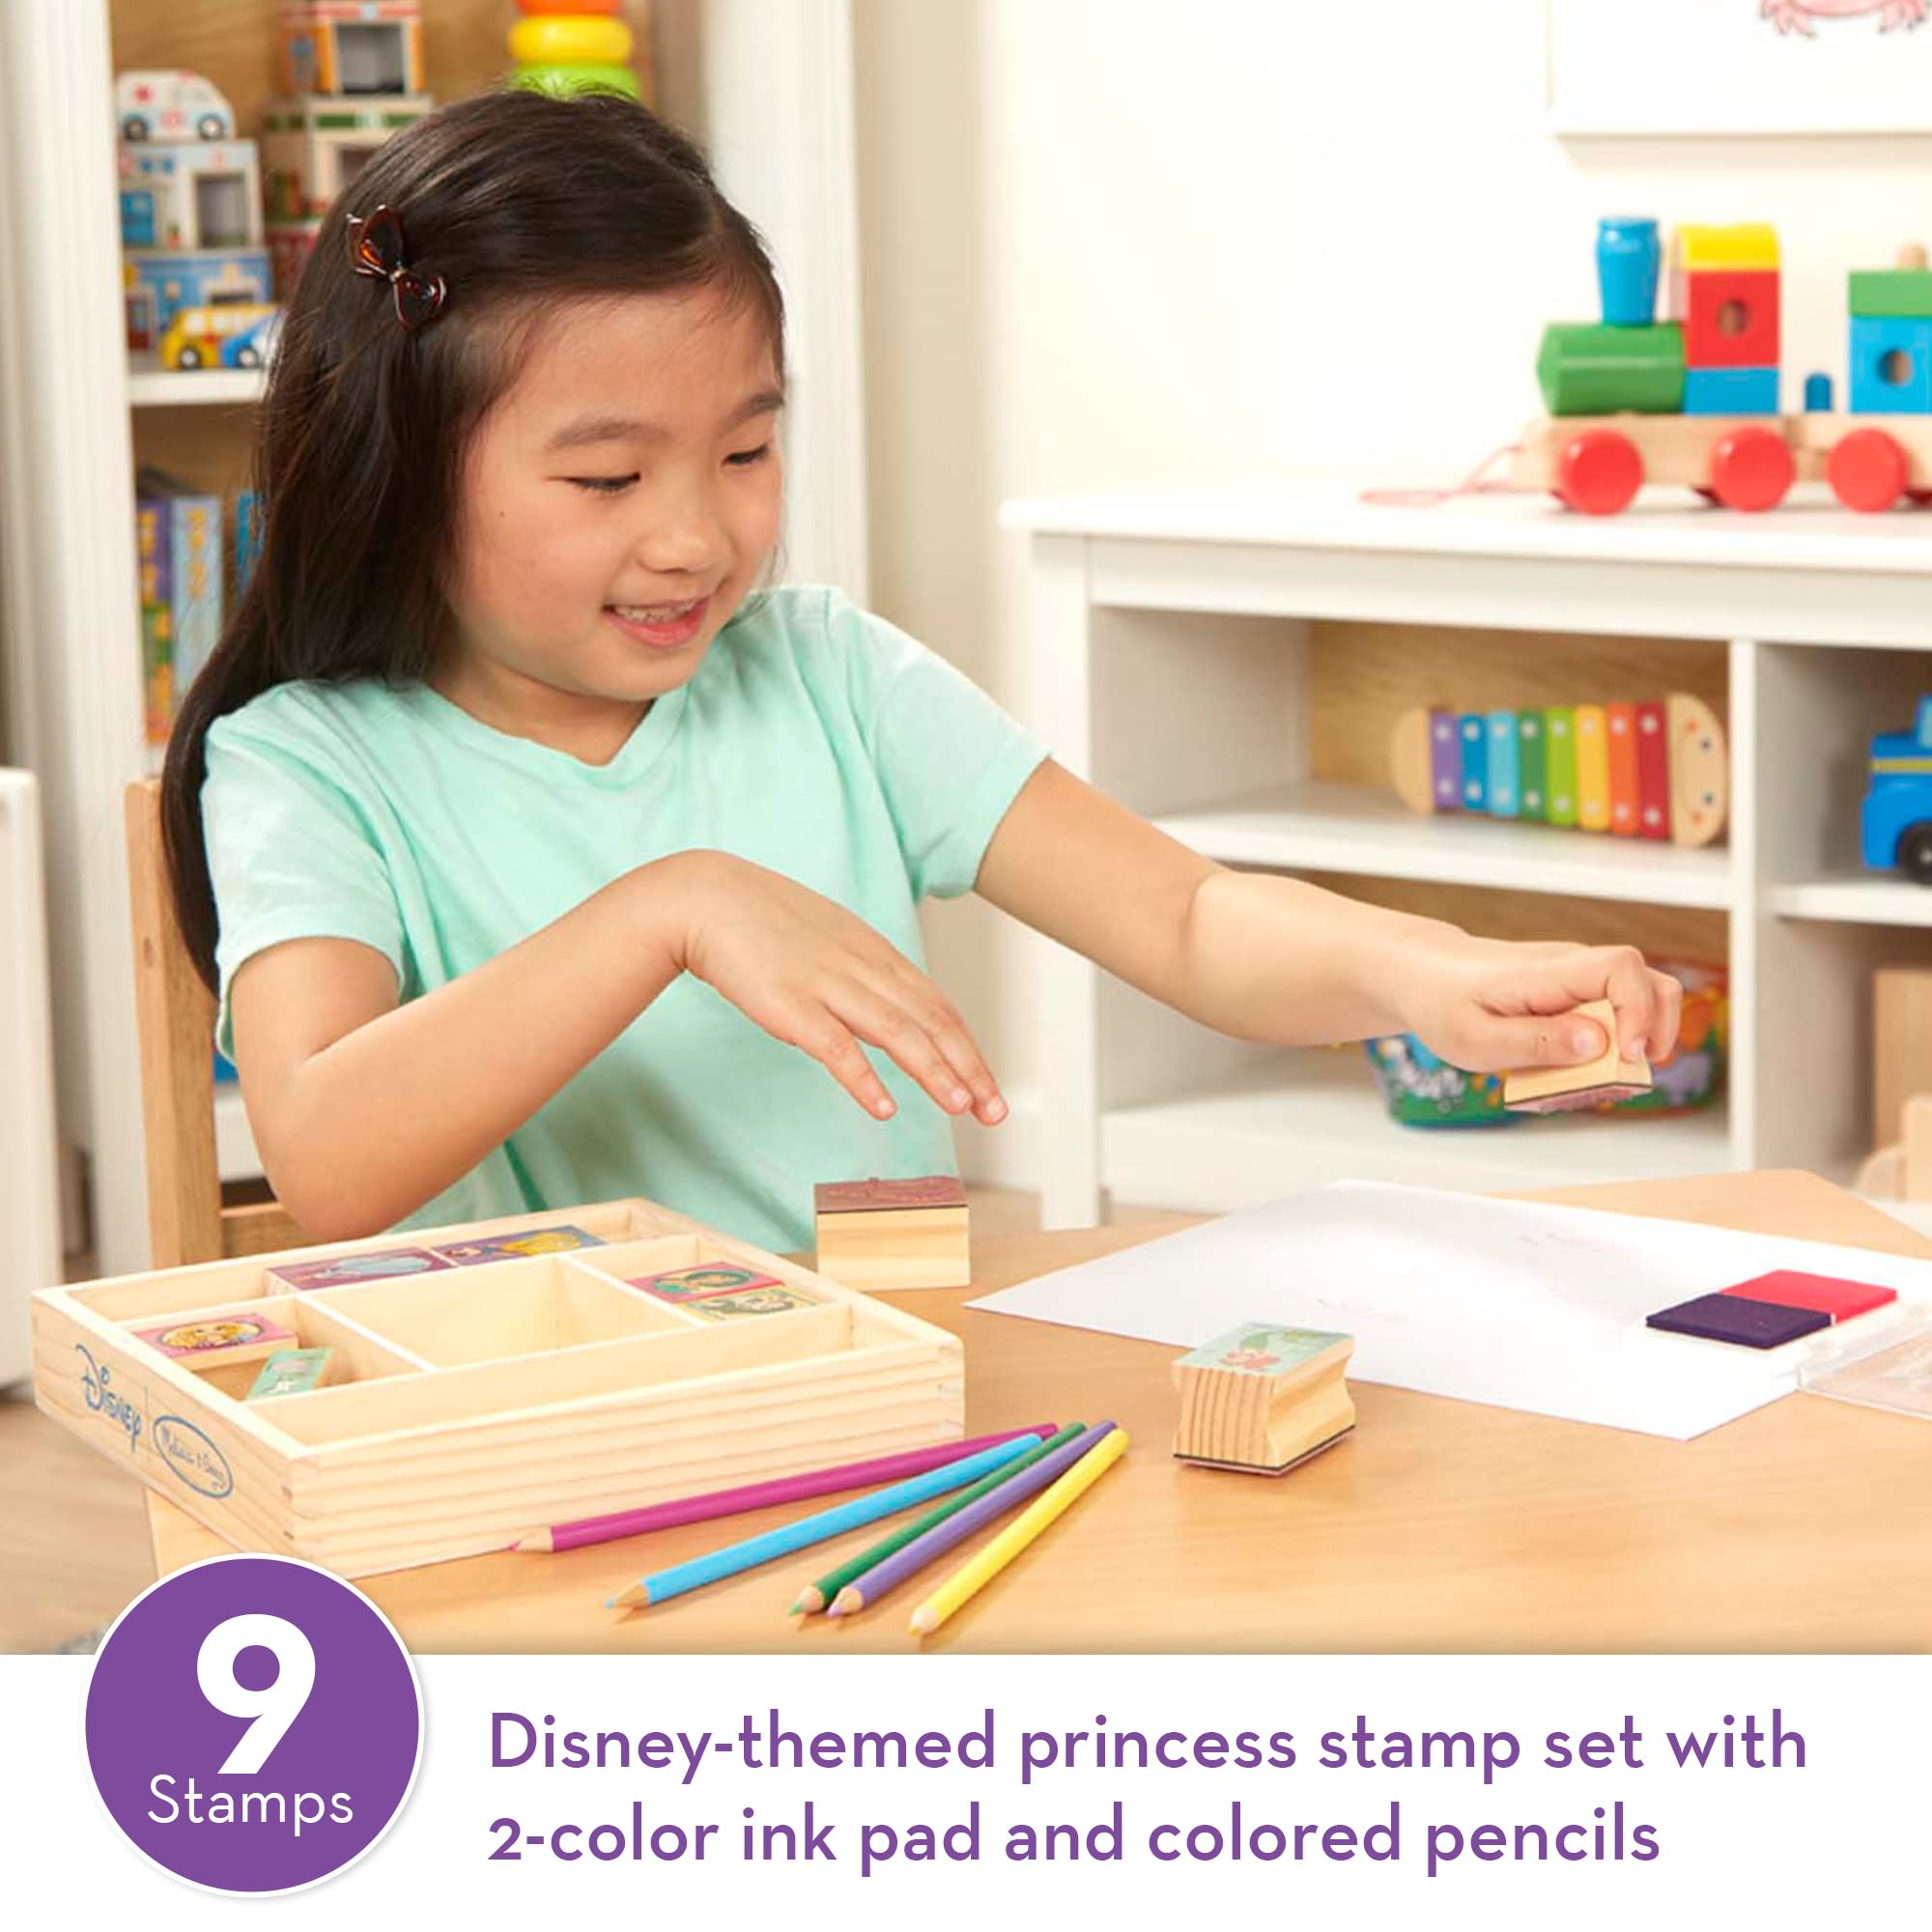 Melissa & Doug Disney Princess Wooden Stamp Set: 9 Stamps, 5 Colored Pencils, and 2-Color Stamp Pad With Washable Ink For Kids Ages 4+